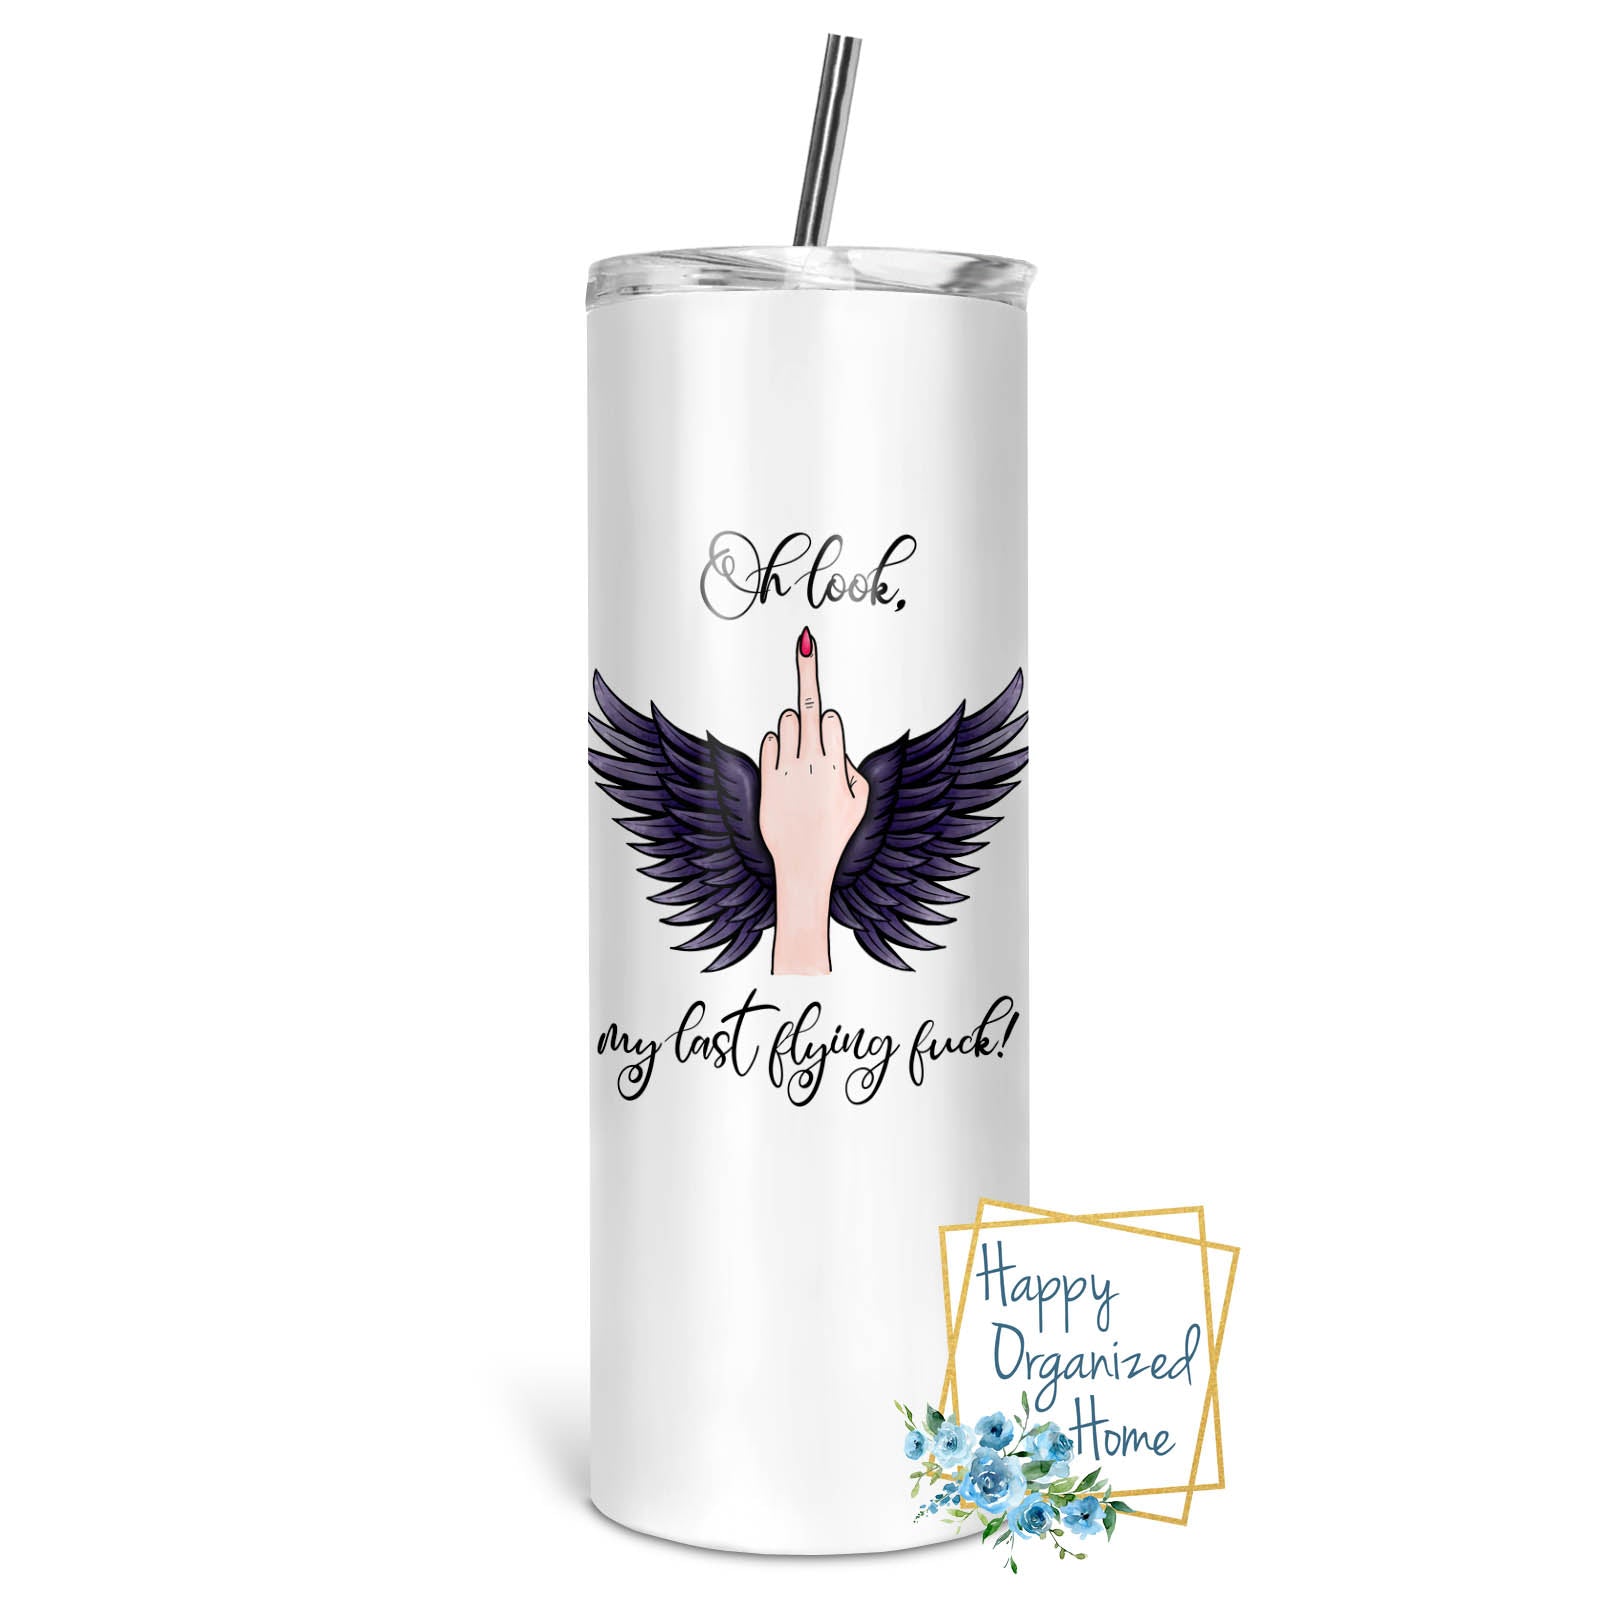 Oh Look, My Last Flying Fuck! - Insulated tumbler with metal straw